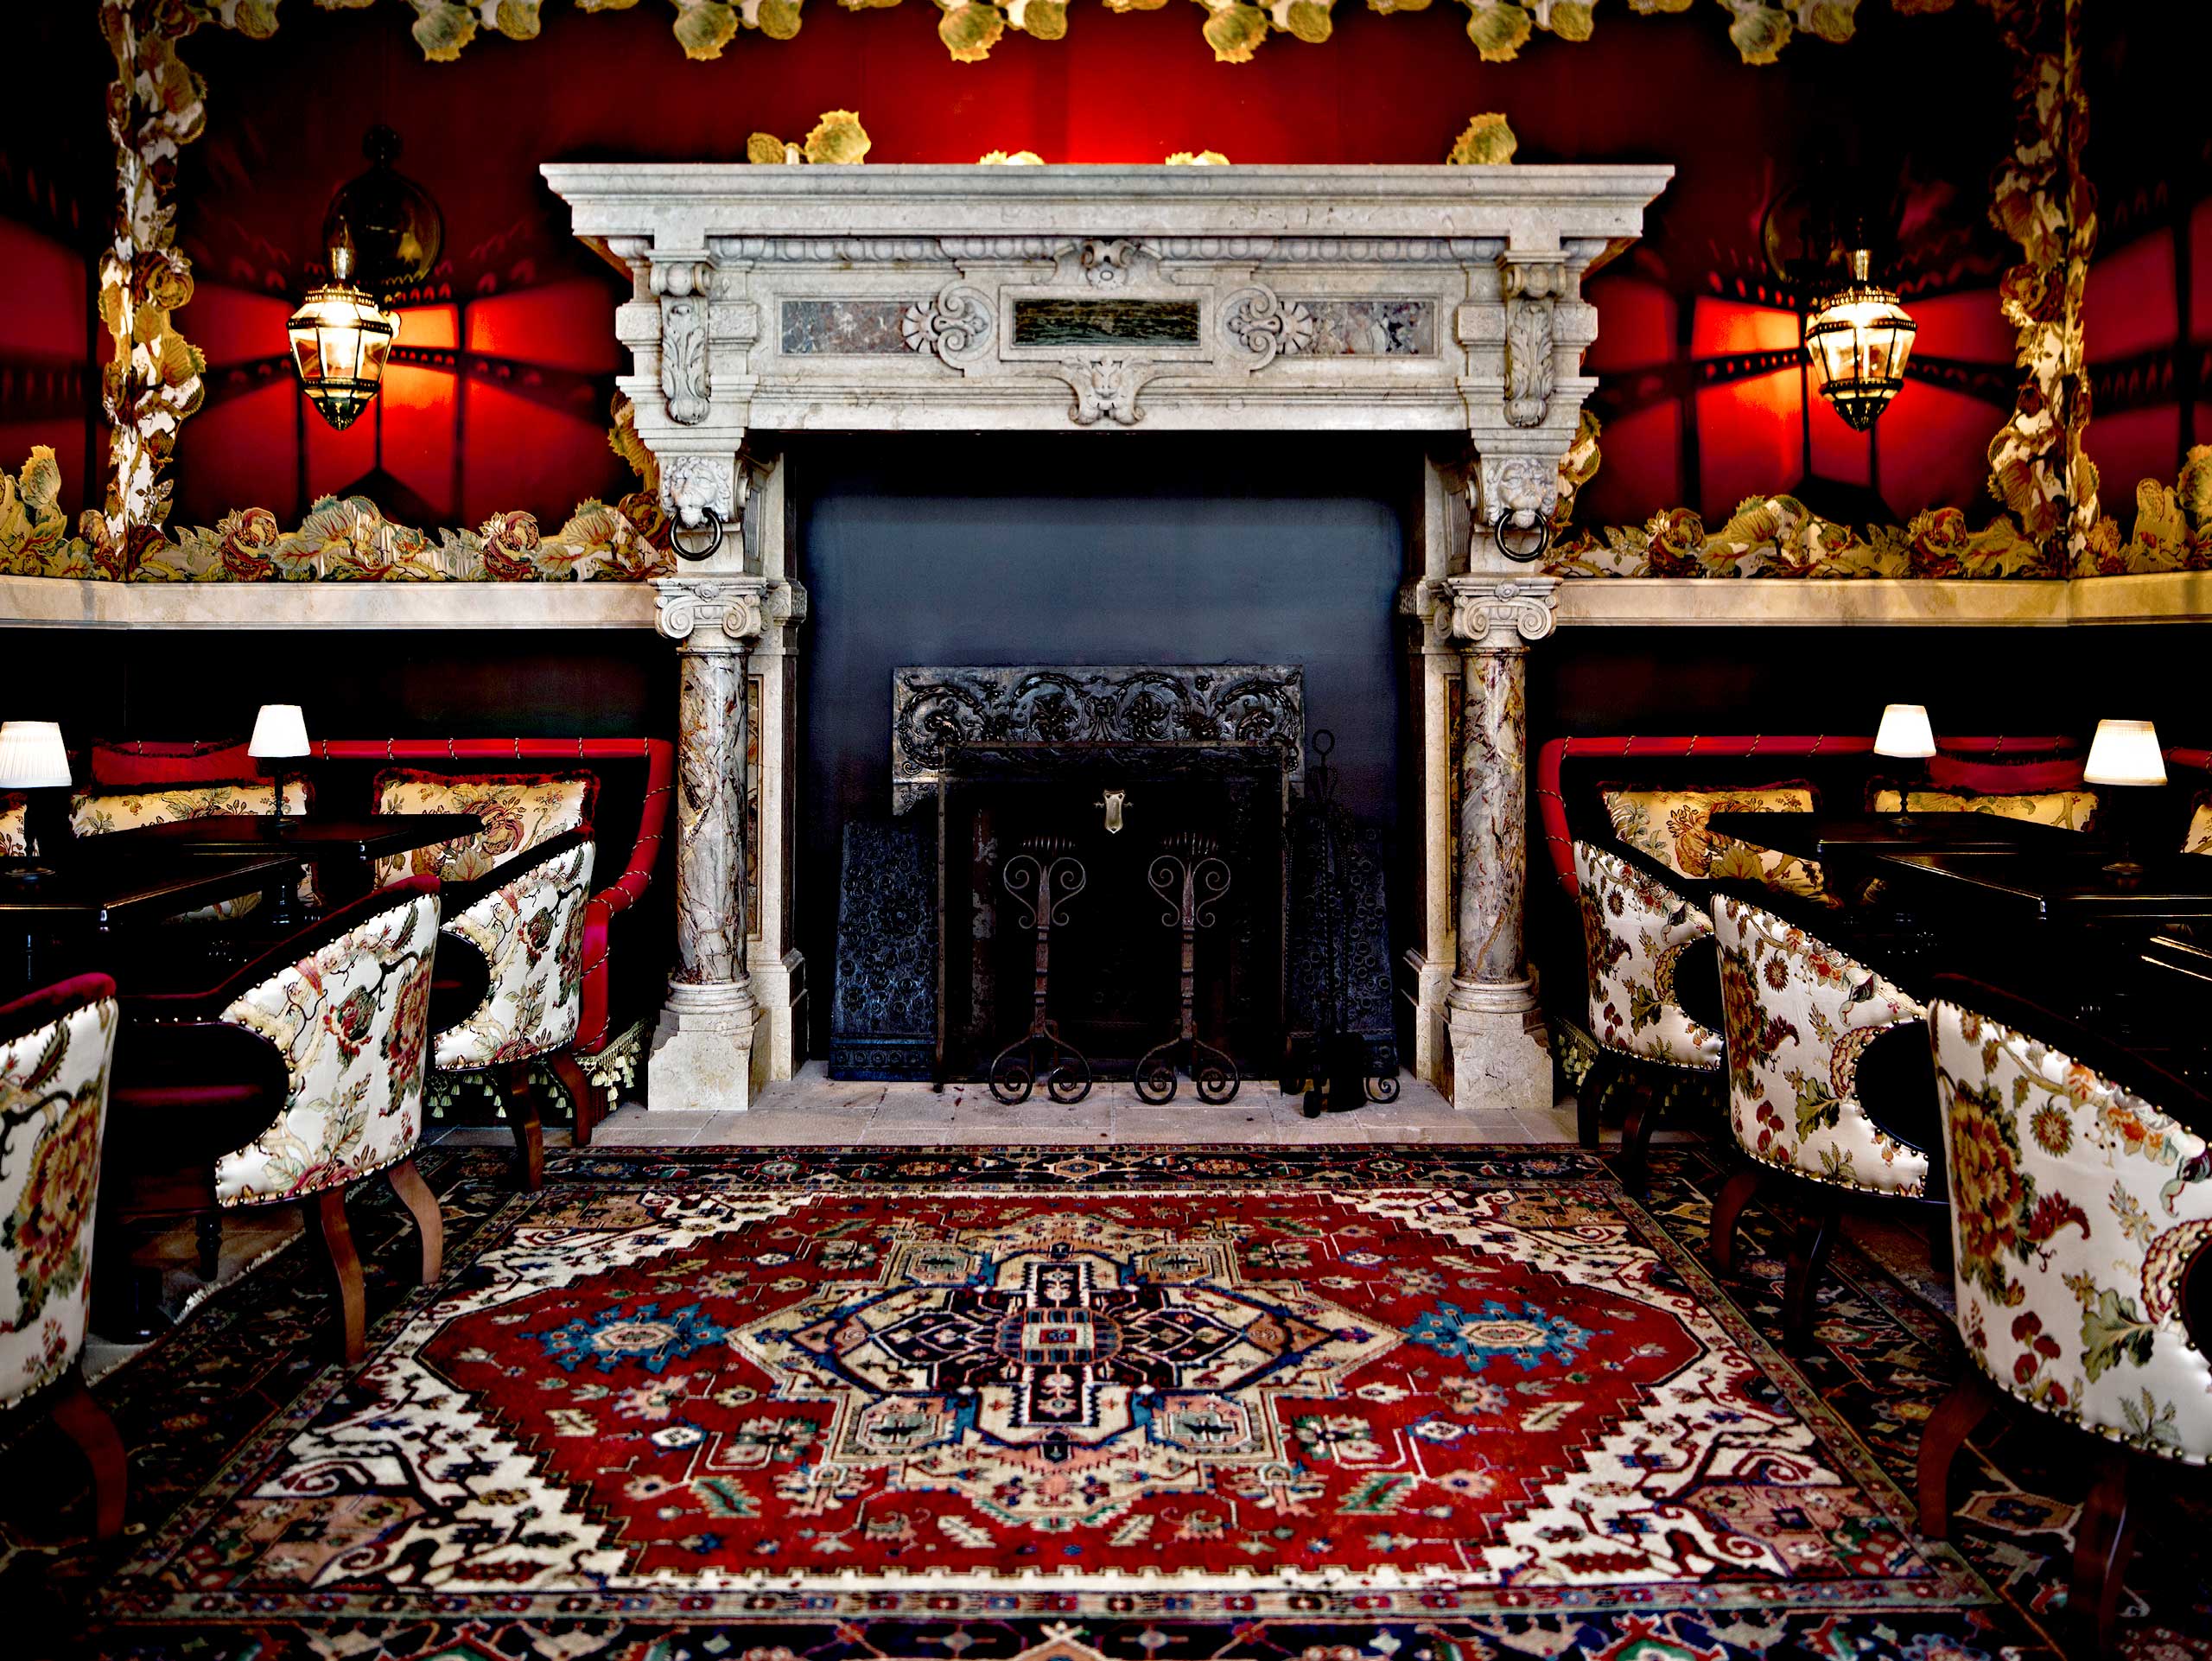 The NoMad Hotel in New York imported an antique fireplace to be the focal point in one of its intimate dining spaces